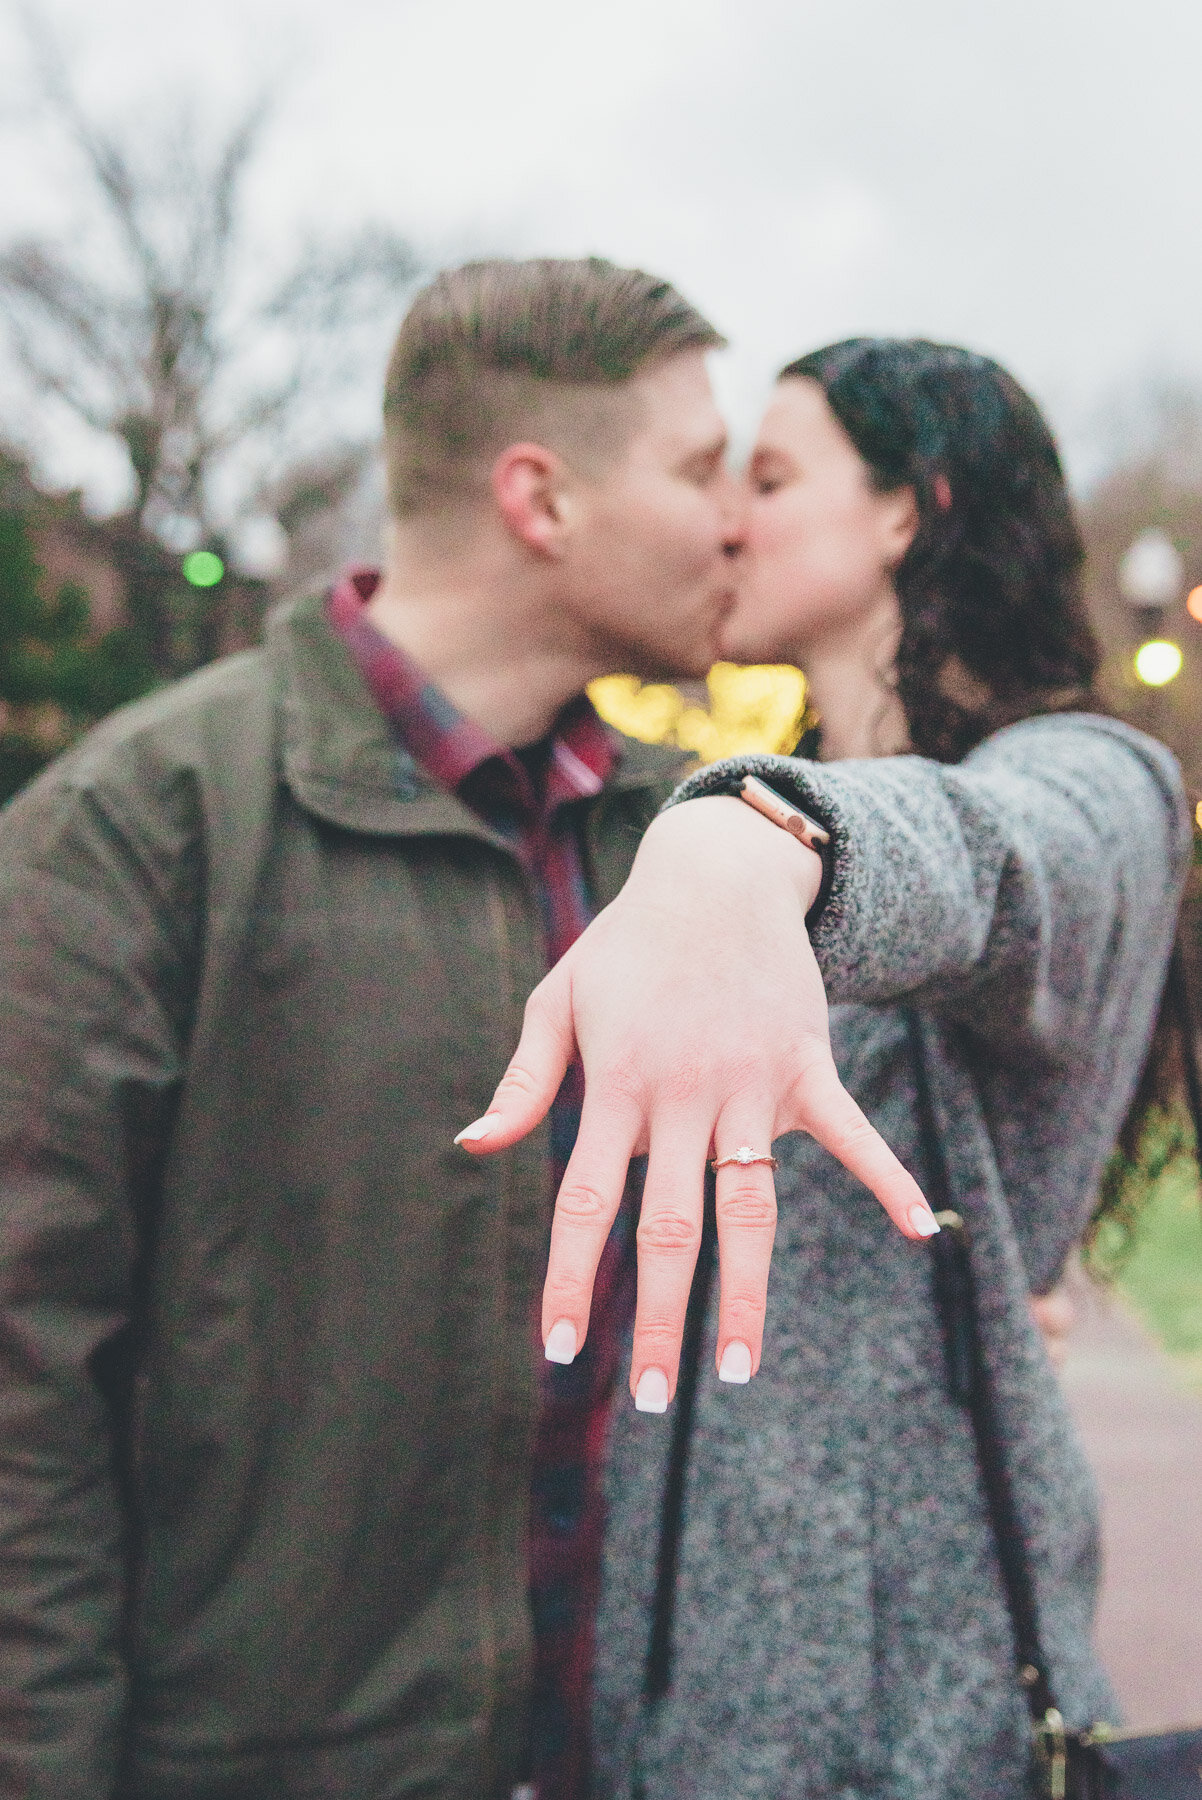 rhode island proposal photographer fiance kissing each other after he proposed in Boston Common in the spring